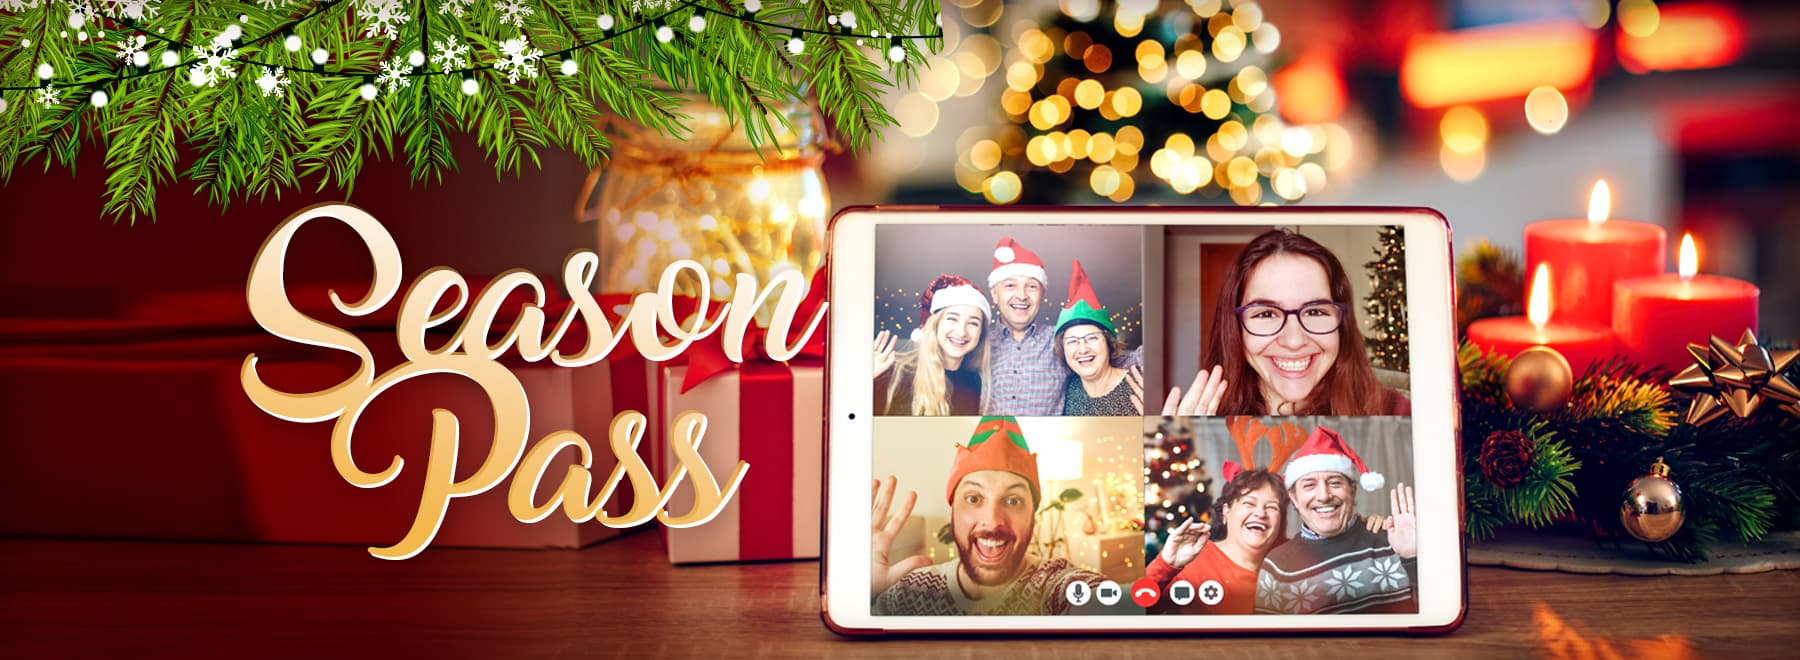 Photo fo a family celebrating Christmas online with family members in a chat